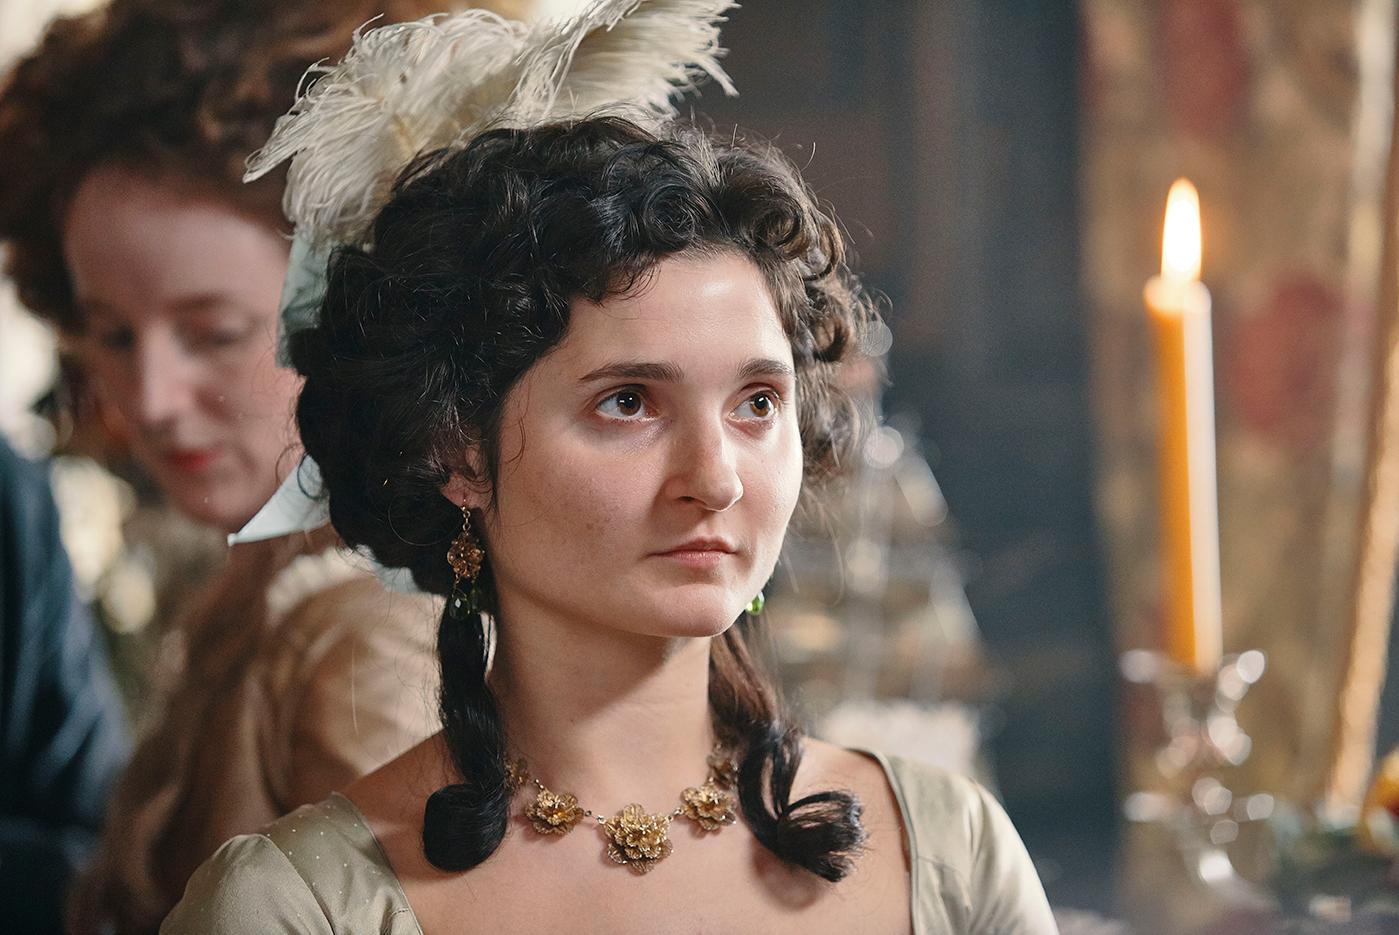 Ruby Bentall as Verity in Poldark. Photo: Mammoth Screen for BBC and MASTERPIECE